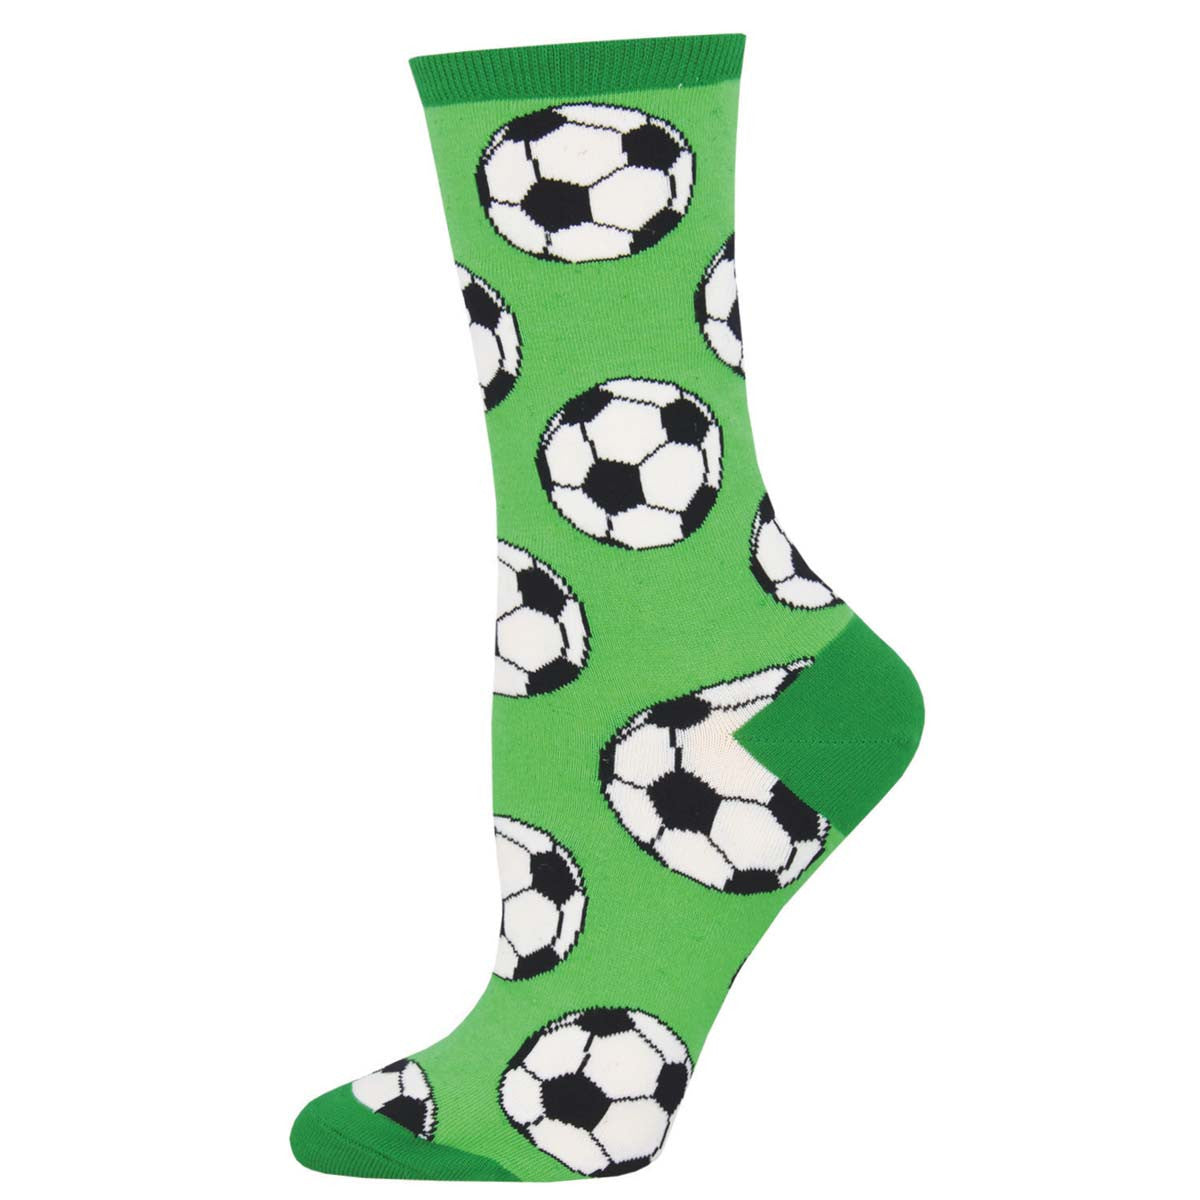 Give And Go Soccer Socks